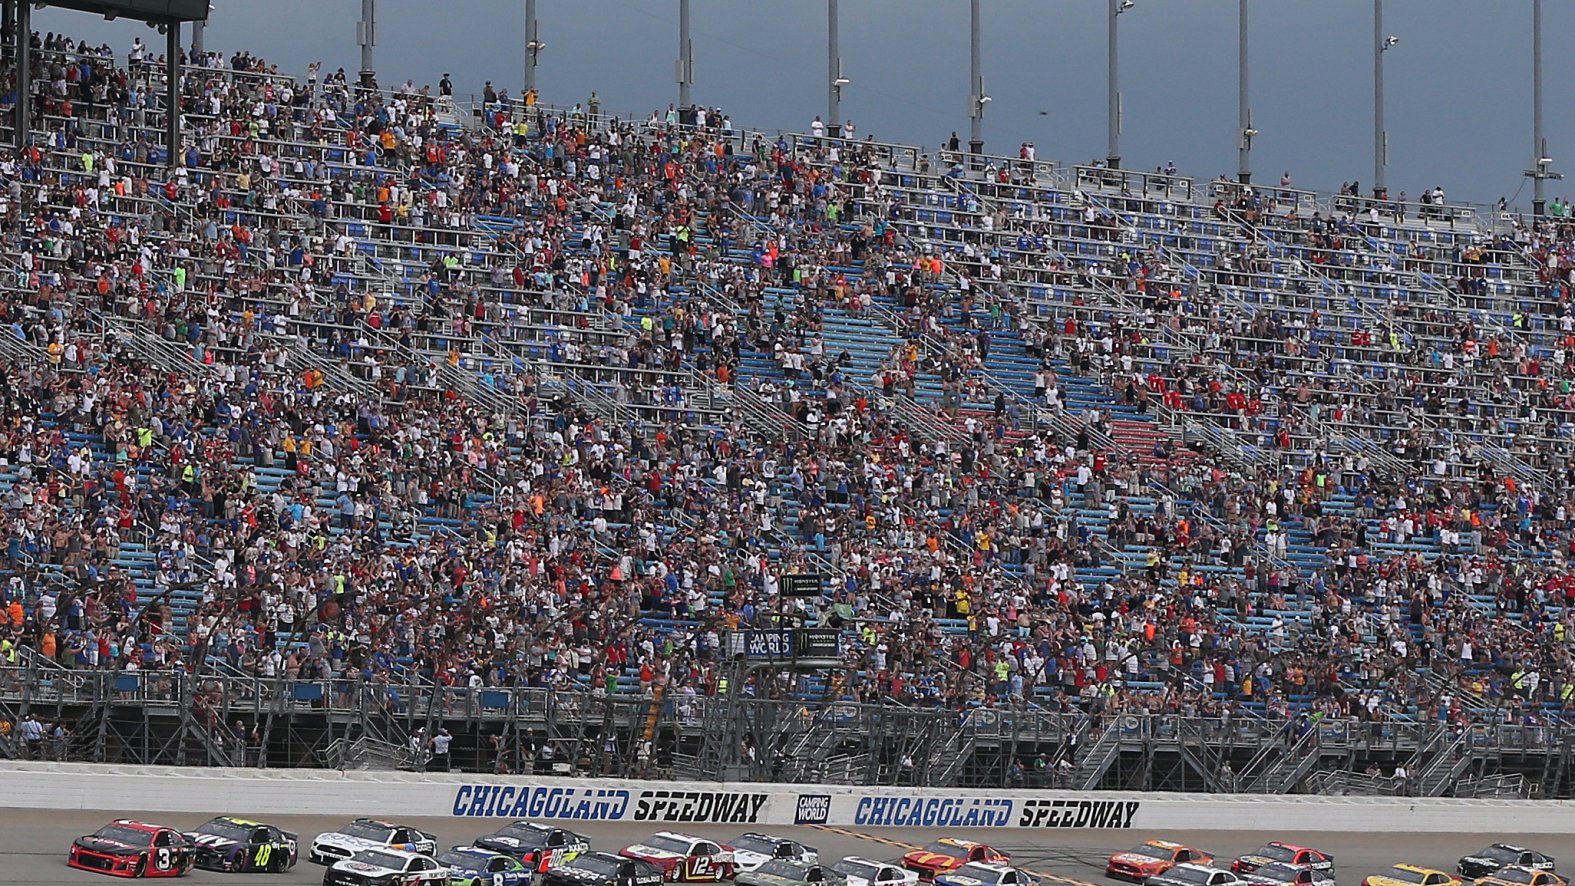 Chicagoland Motor Speedway Absent From NASCAR Schedule for 2021 Season – NBC Chicago